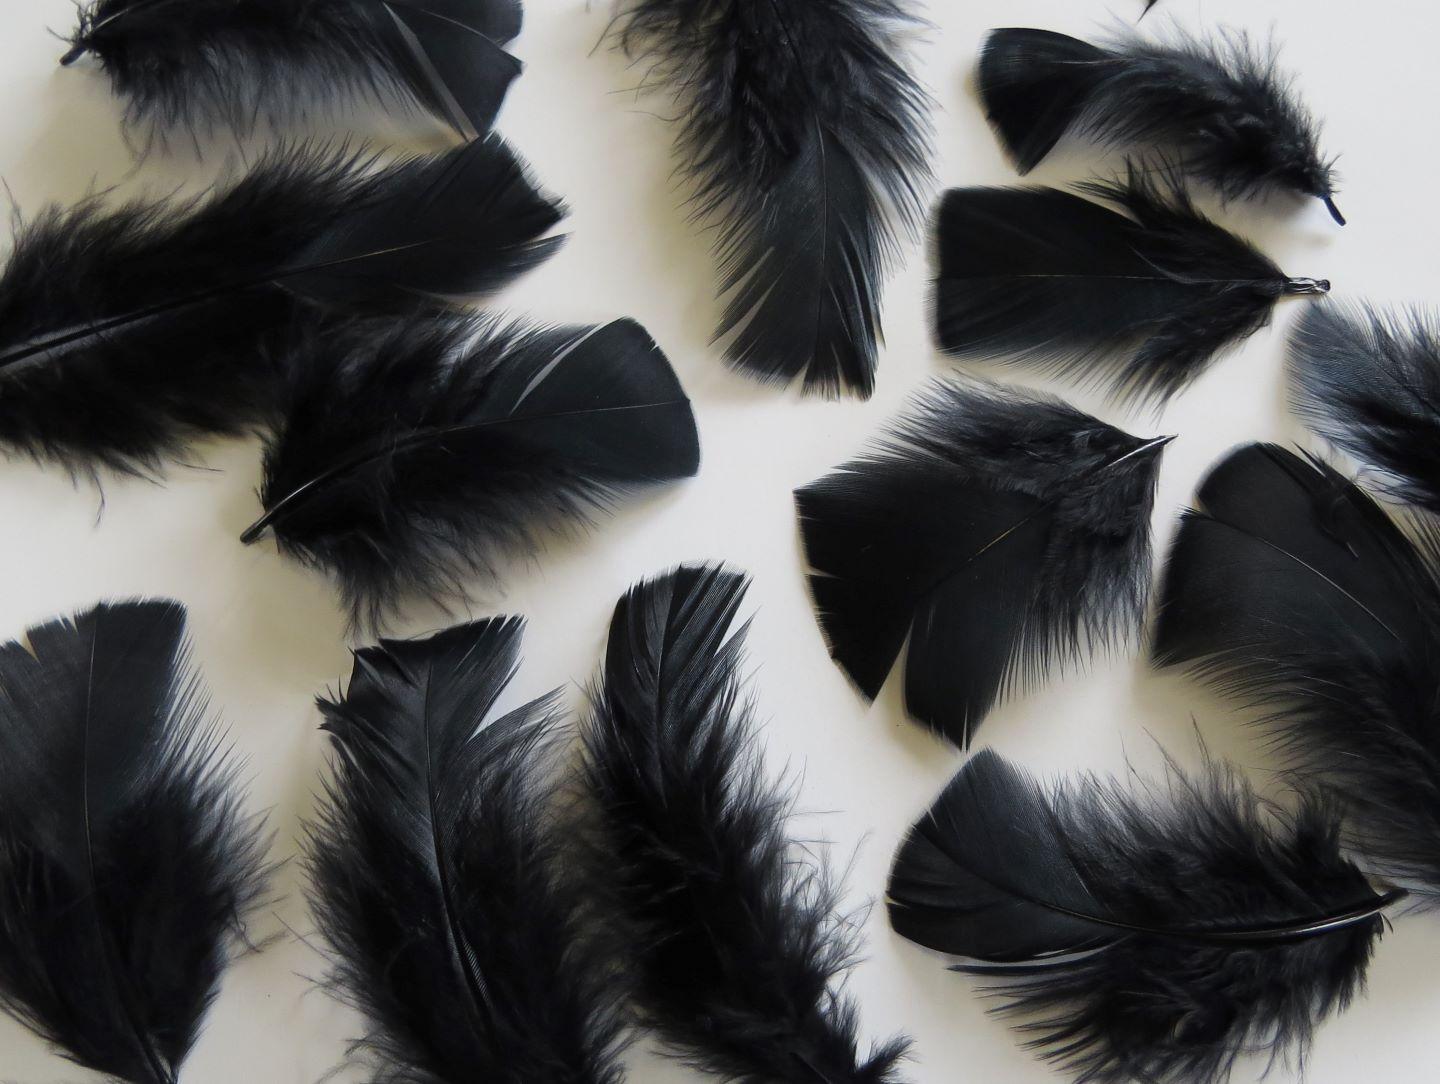 https://www.feathergirl.co.nz/sites/www.feathergirl.co.nz/files/styles/full_1440/public/product-images/black-turkey-plumage-feathers-closeup.jpg